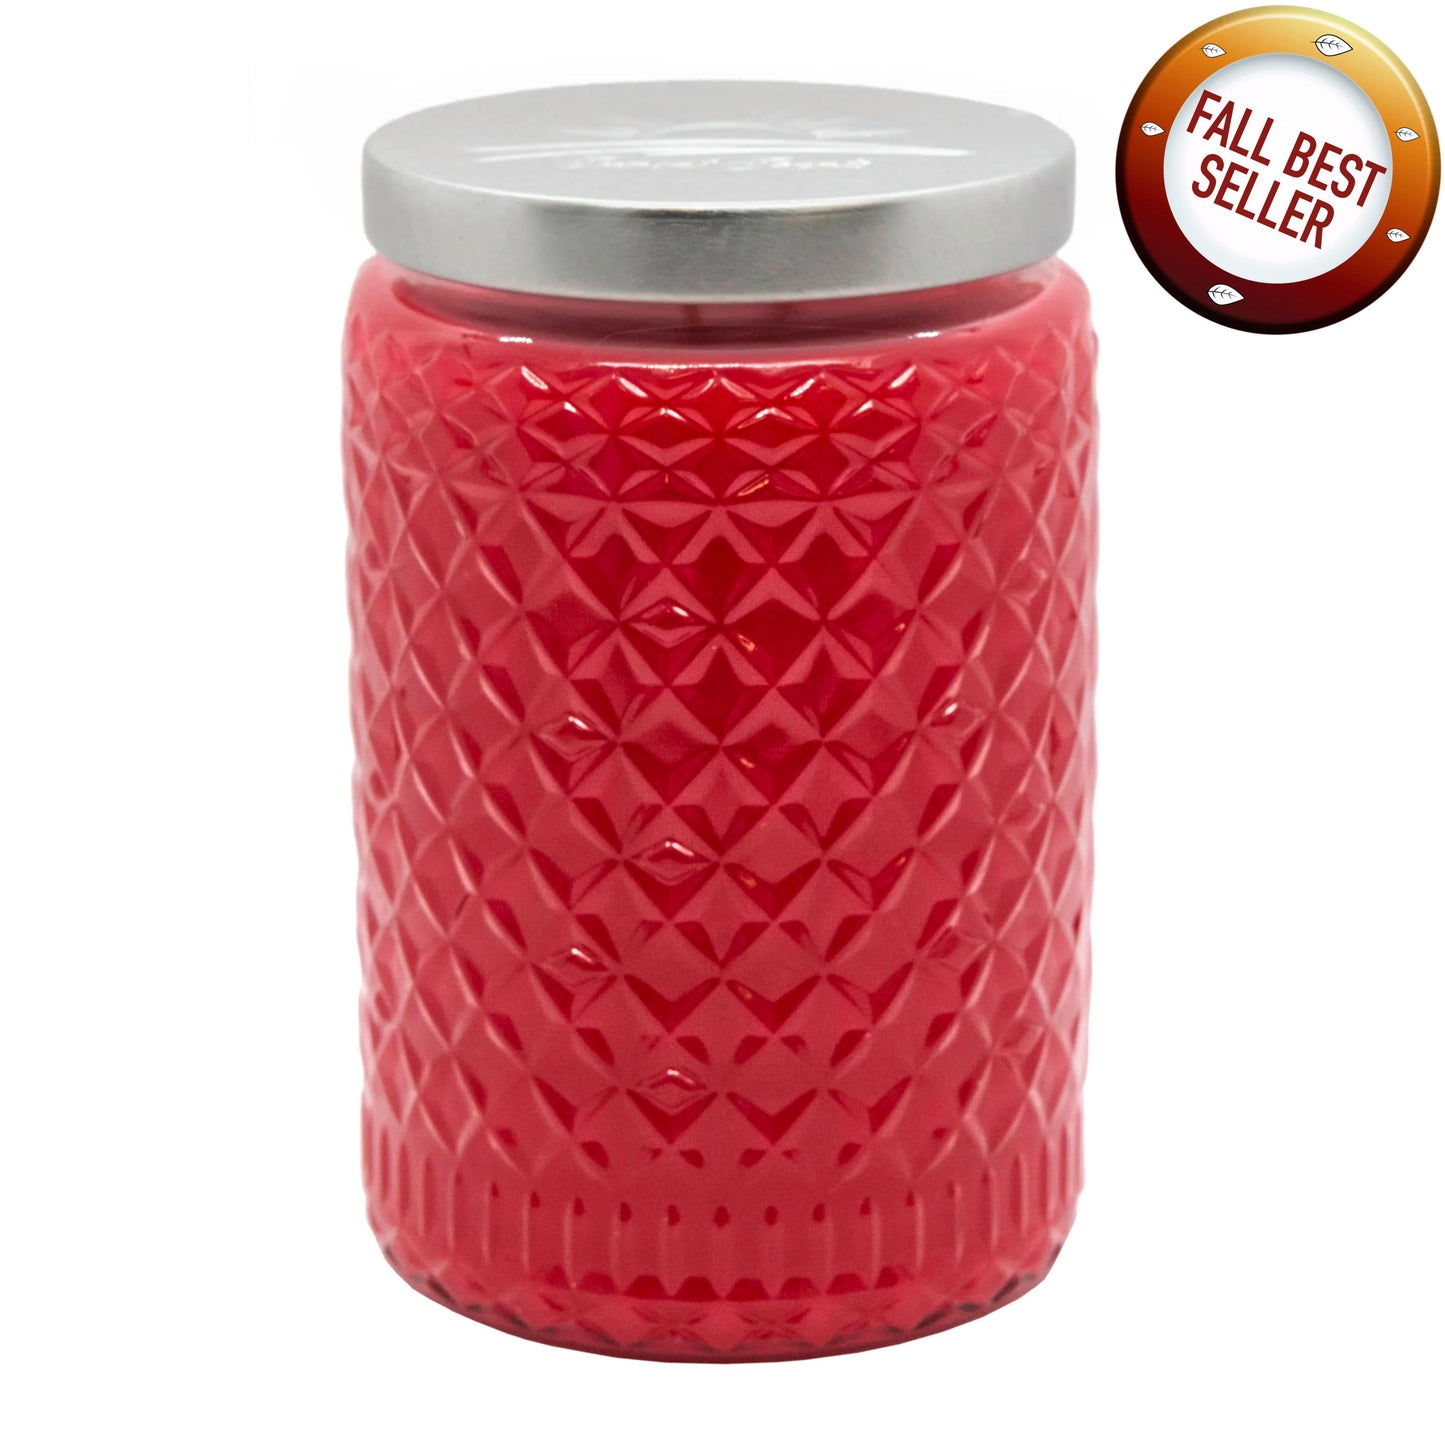 Warm & Cozy Scented Candle best seller fall